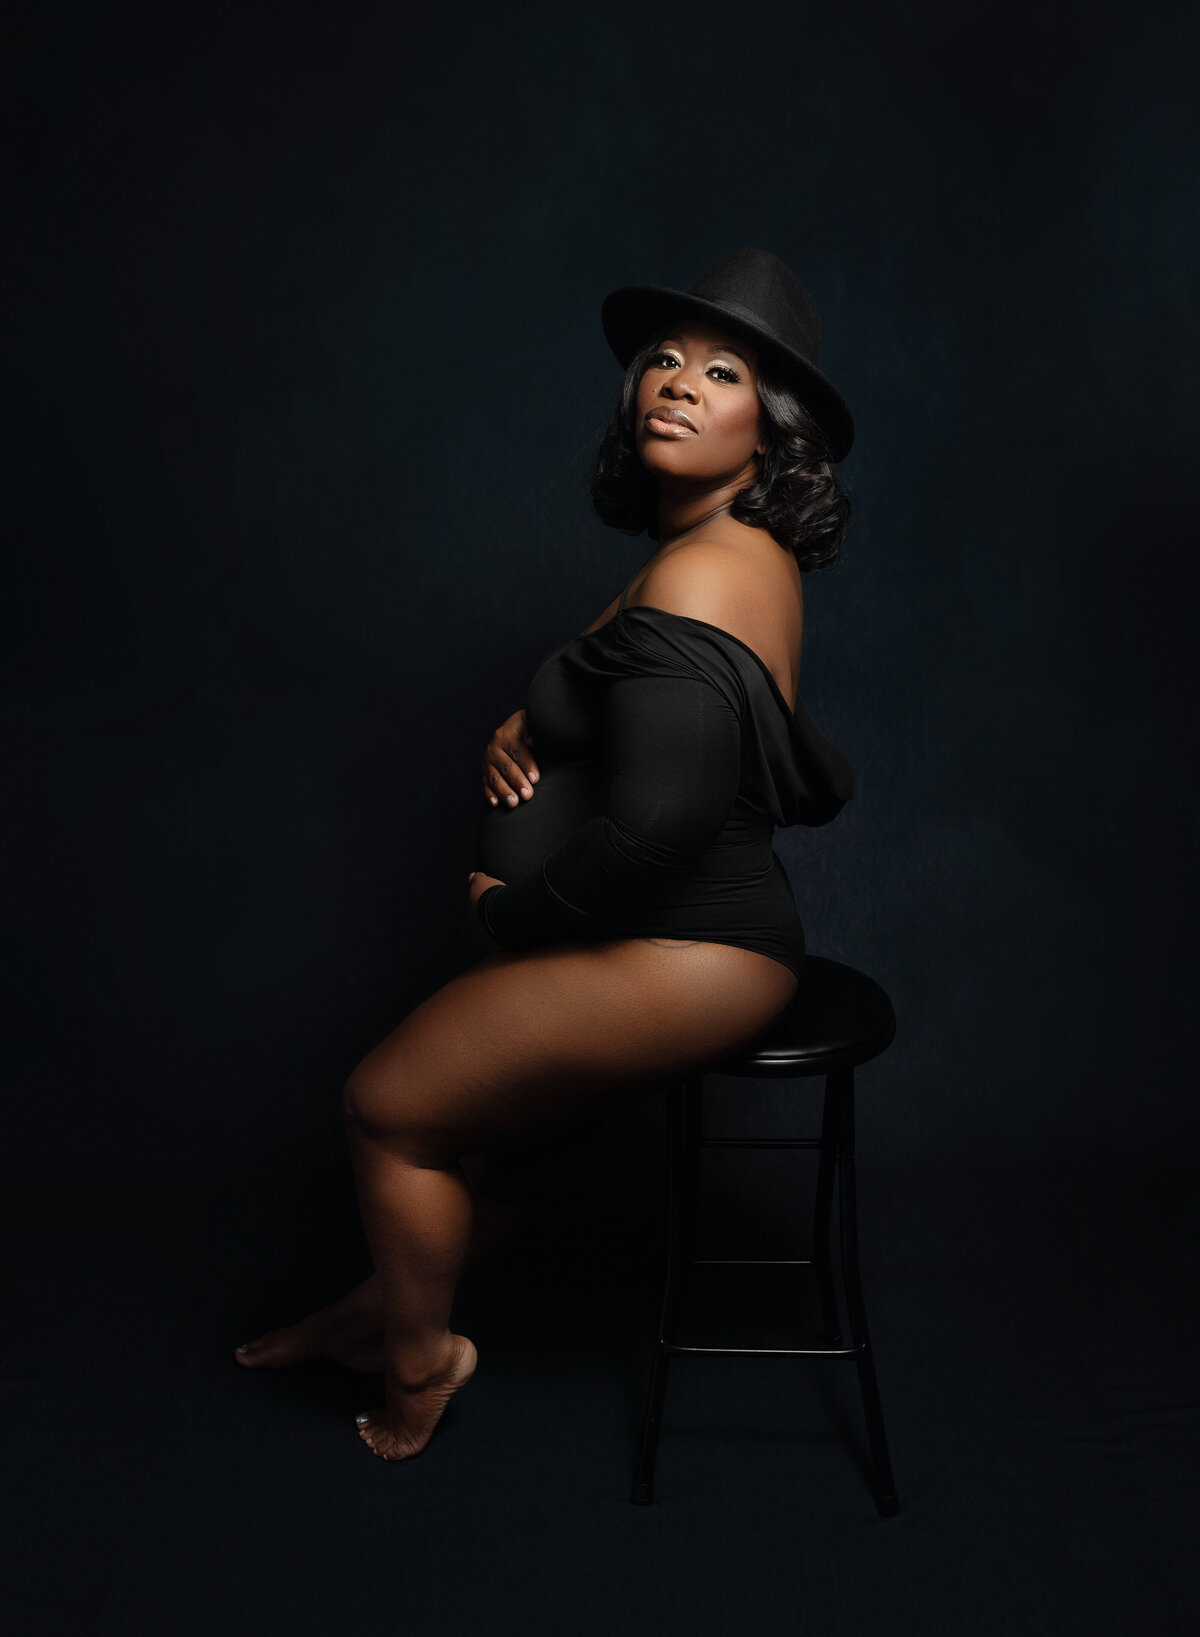 A woman in a black outfit and hat sits on a stool in a studio holding her bump